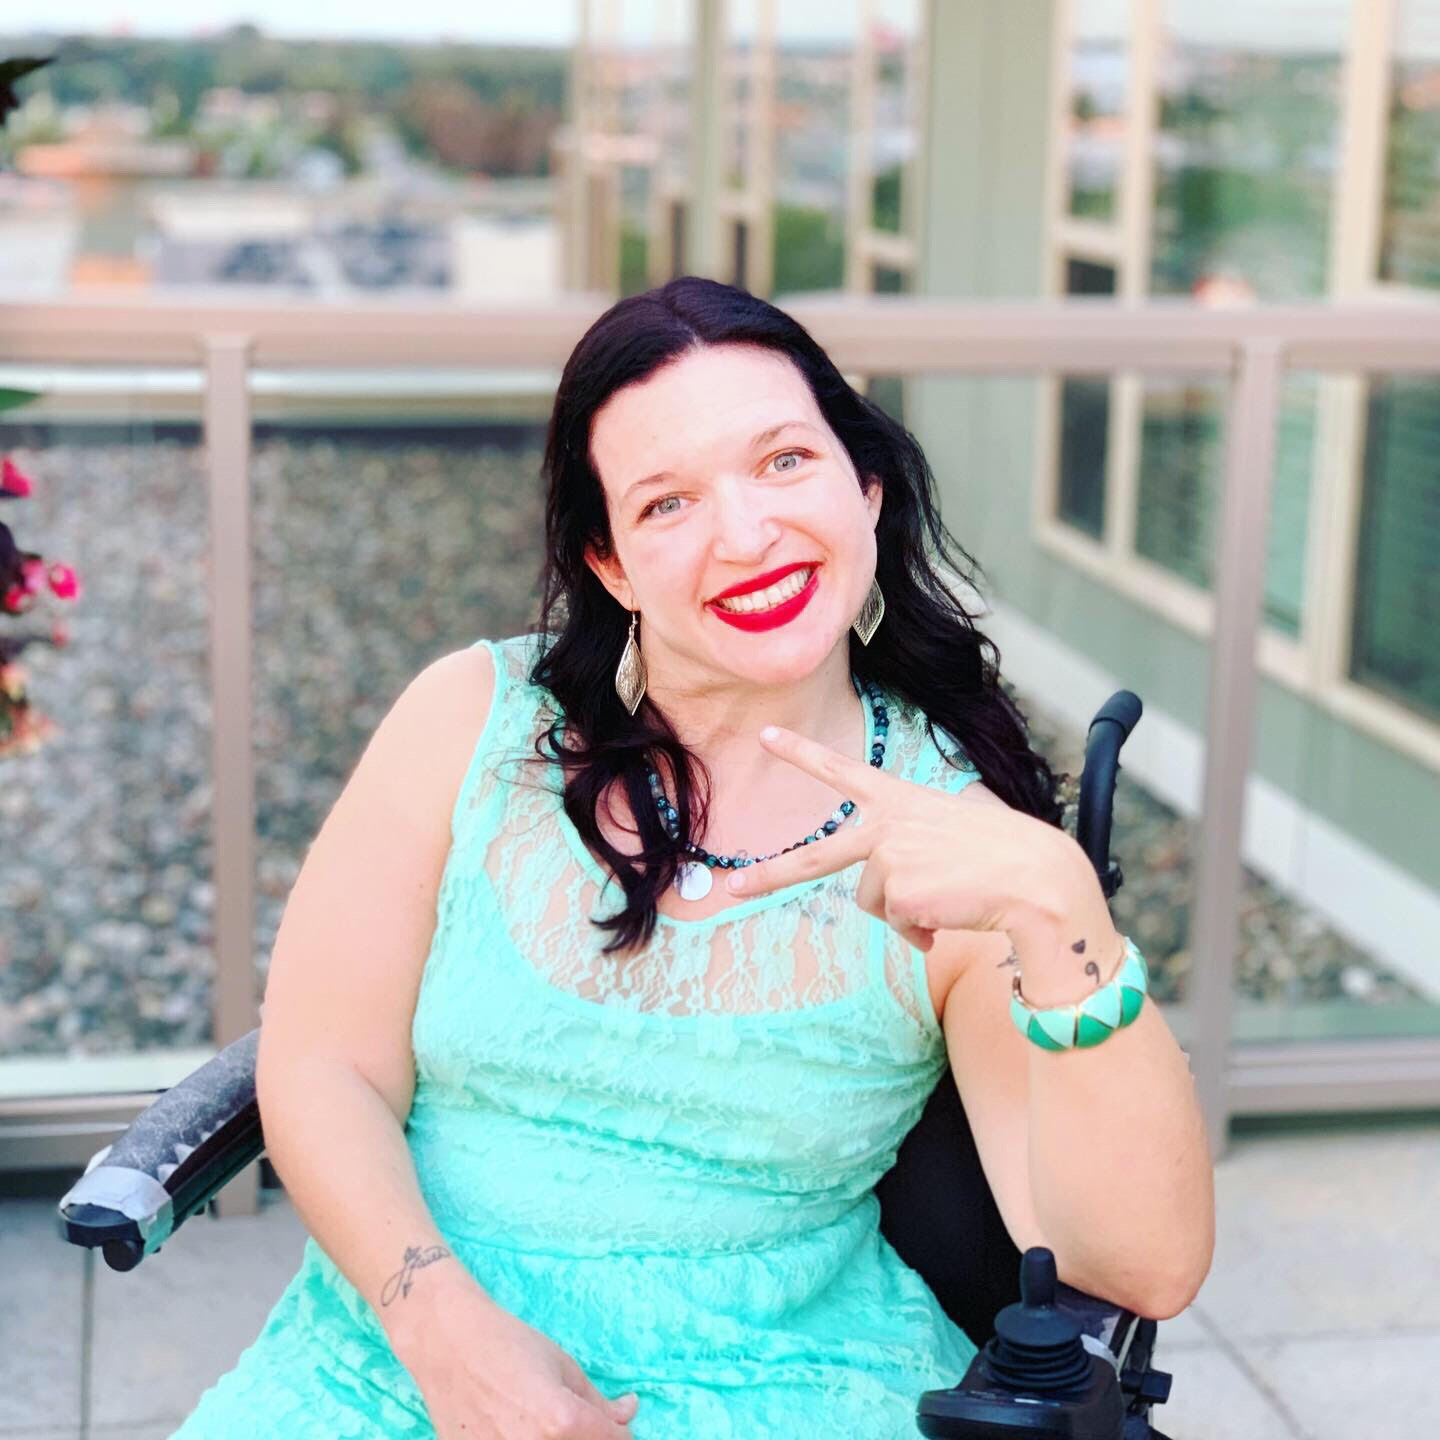 Mollie making the peace sign. She is sitting in her power wheelchair and wearing a bright turquoise dress.